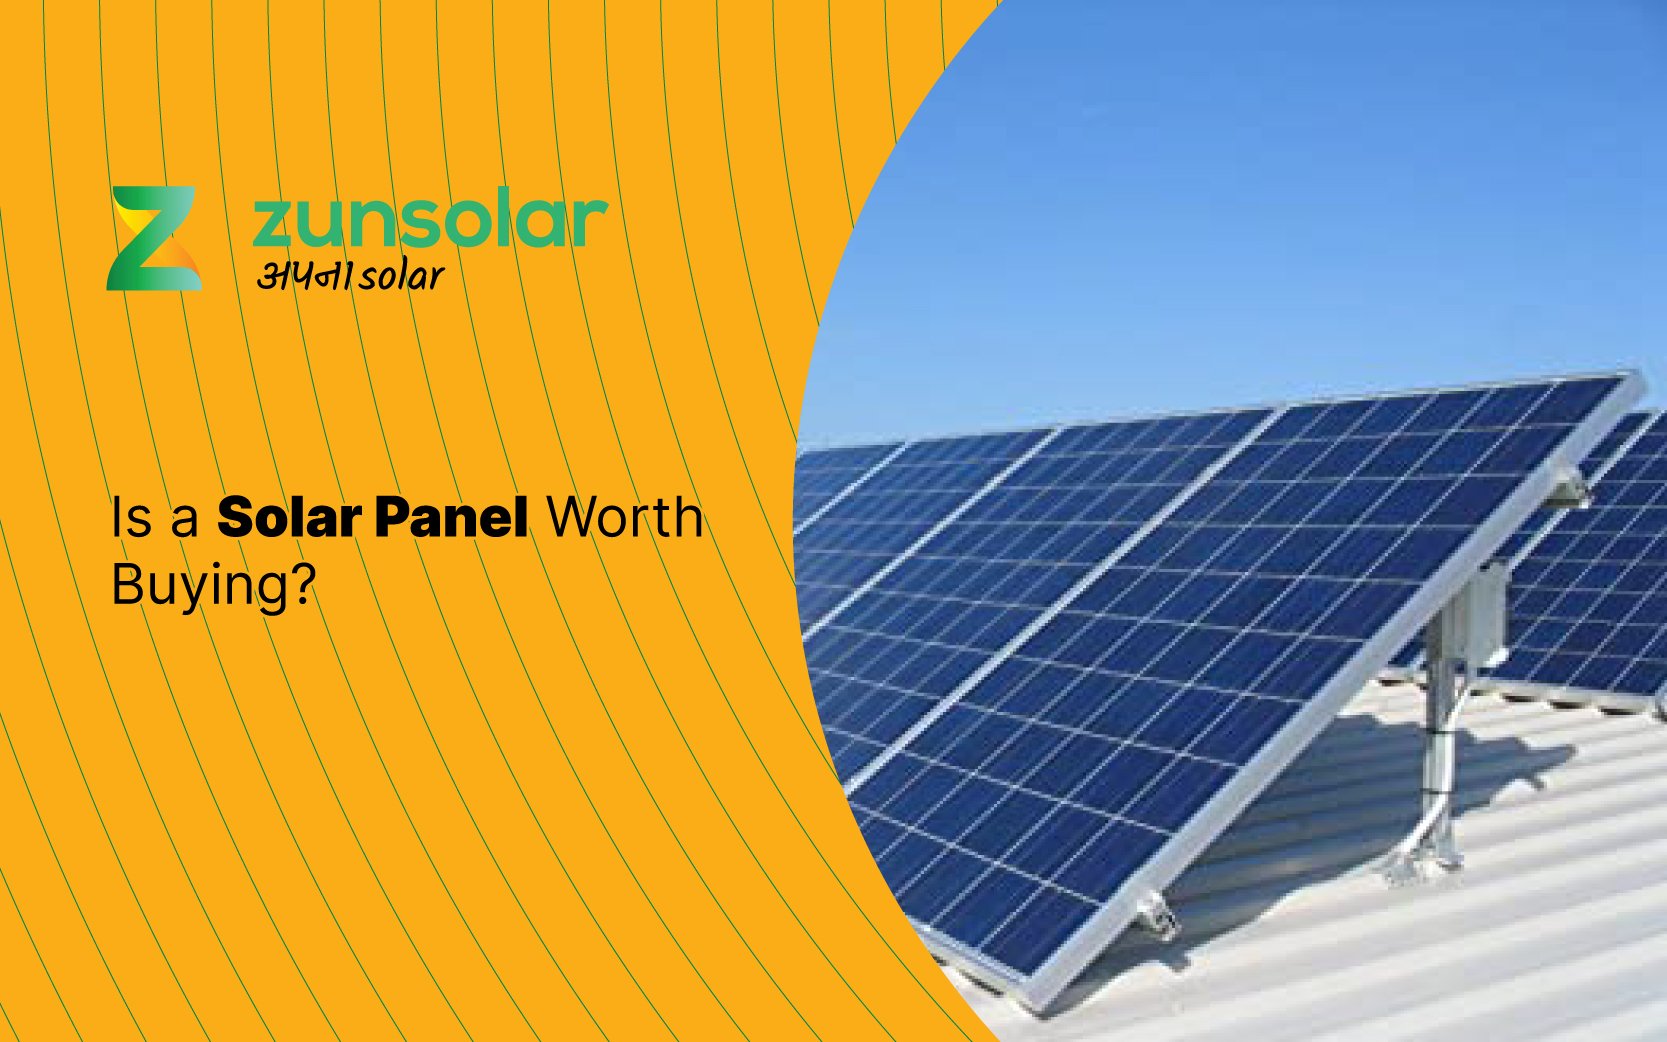 Is a Solar Panel Worth Buying?